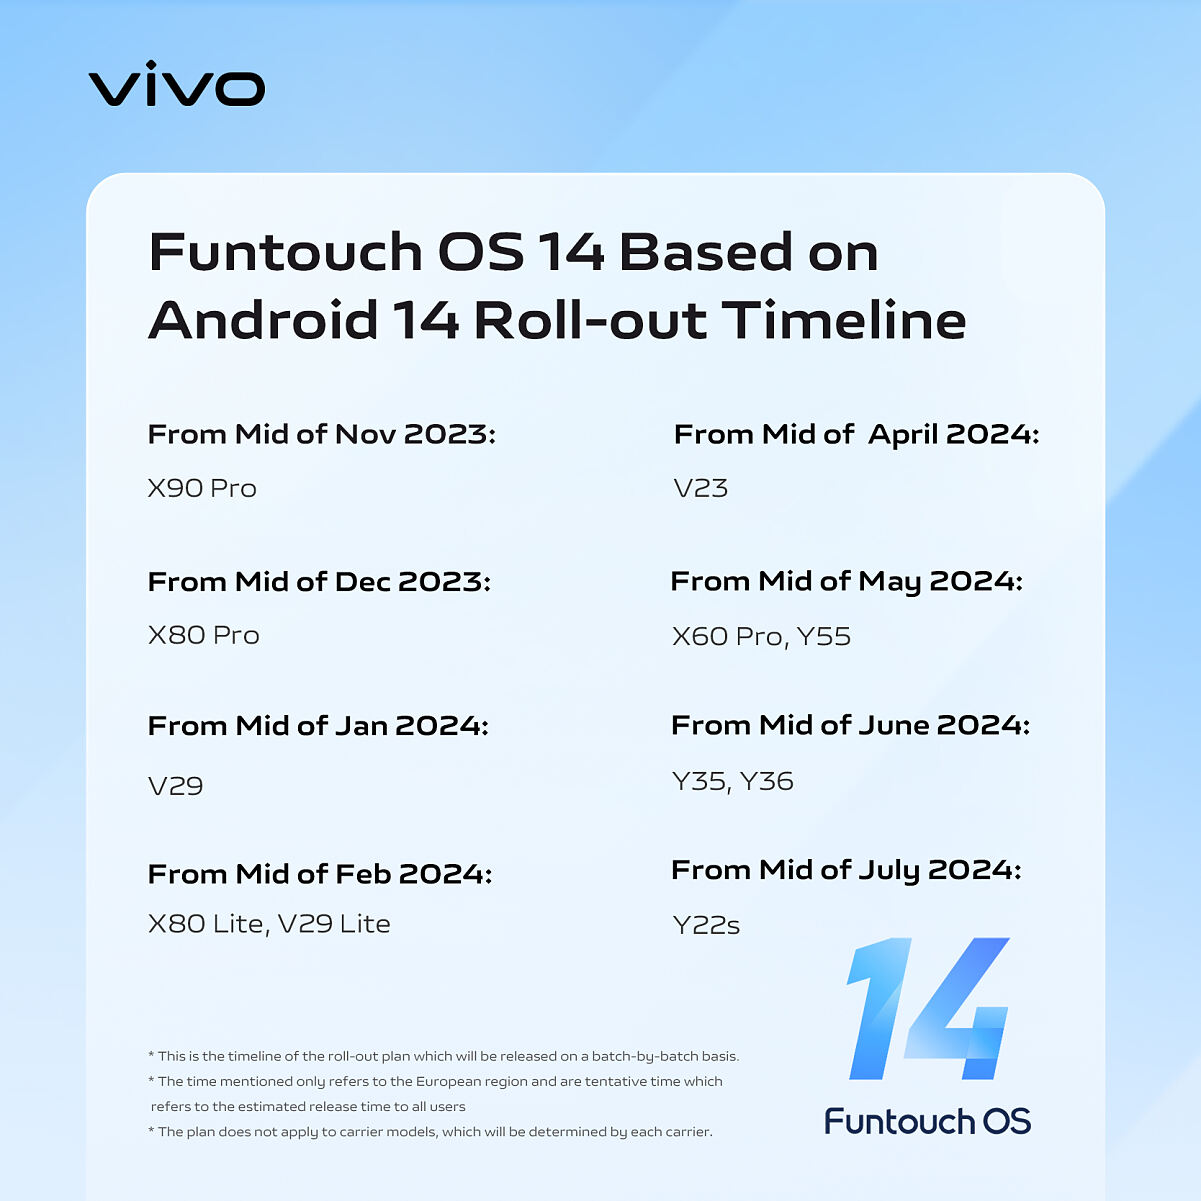 vivo Funtouch OS 14 Roll-out Timeline